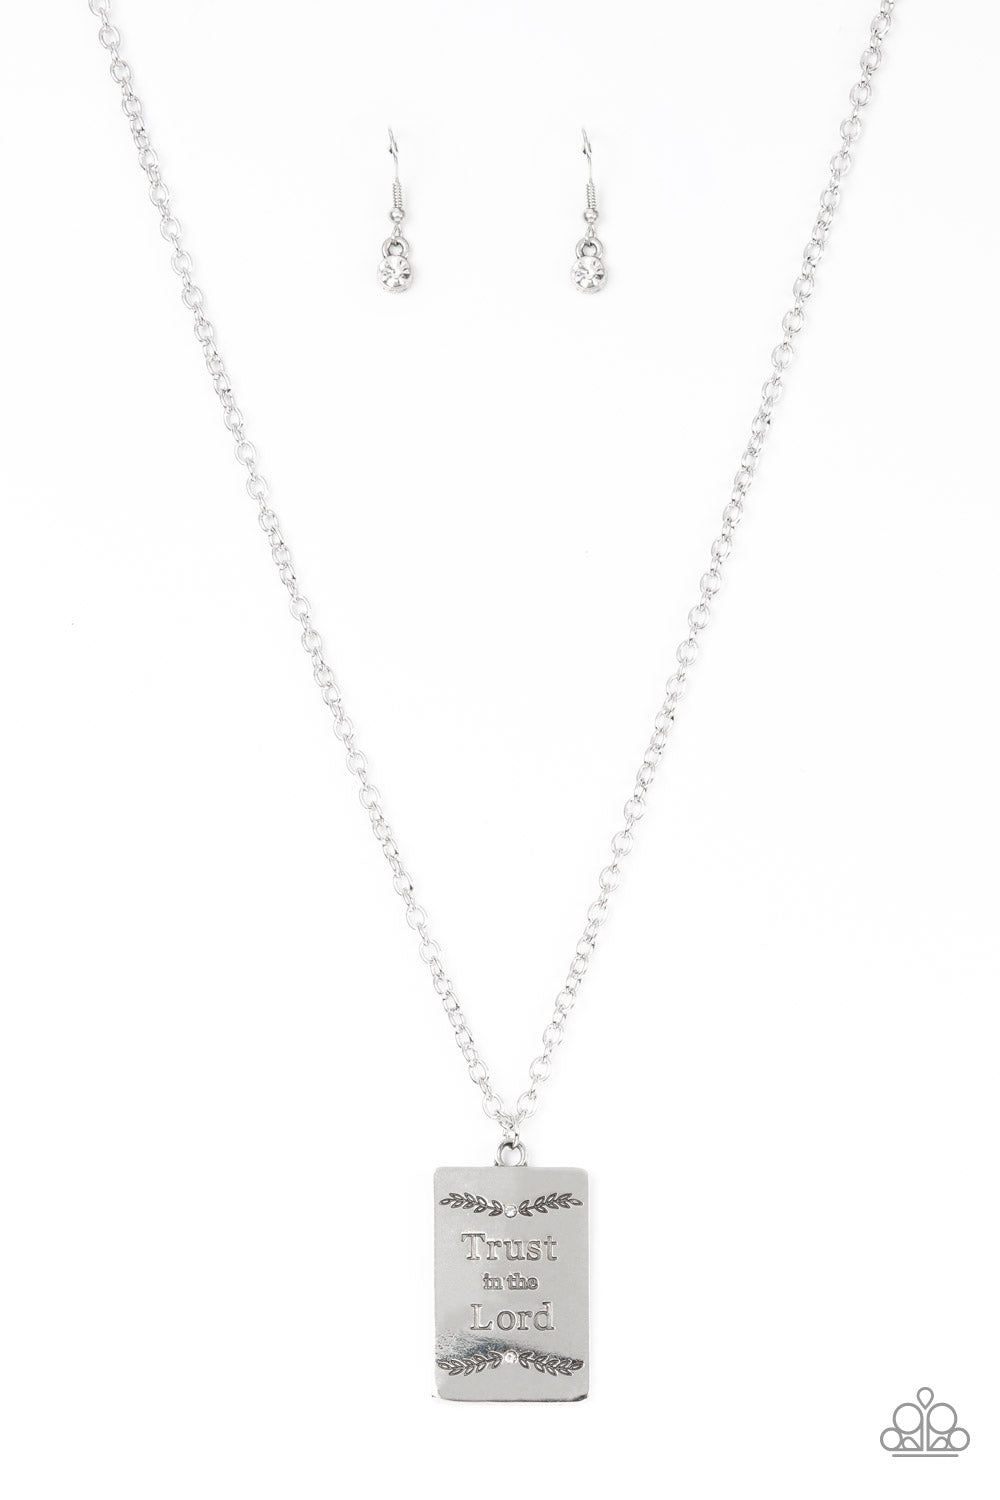 All About Trust Paparazzi Accessories Necklace with Earrings White